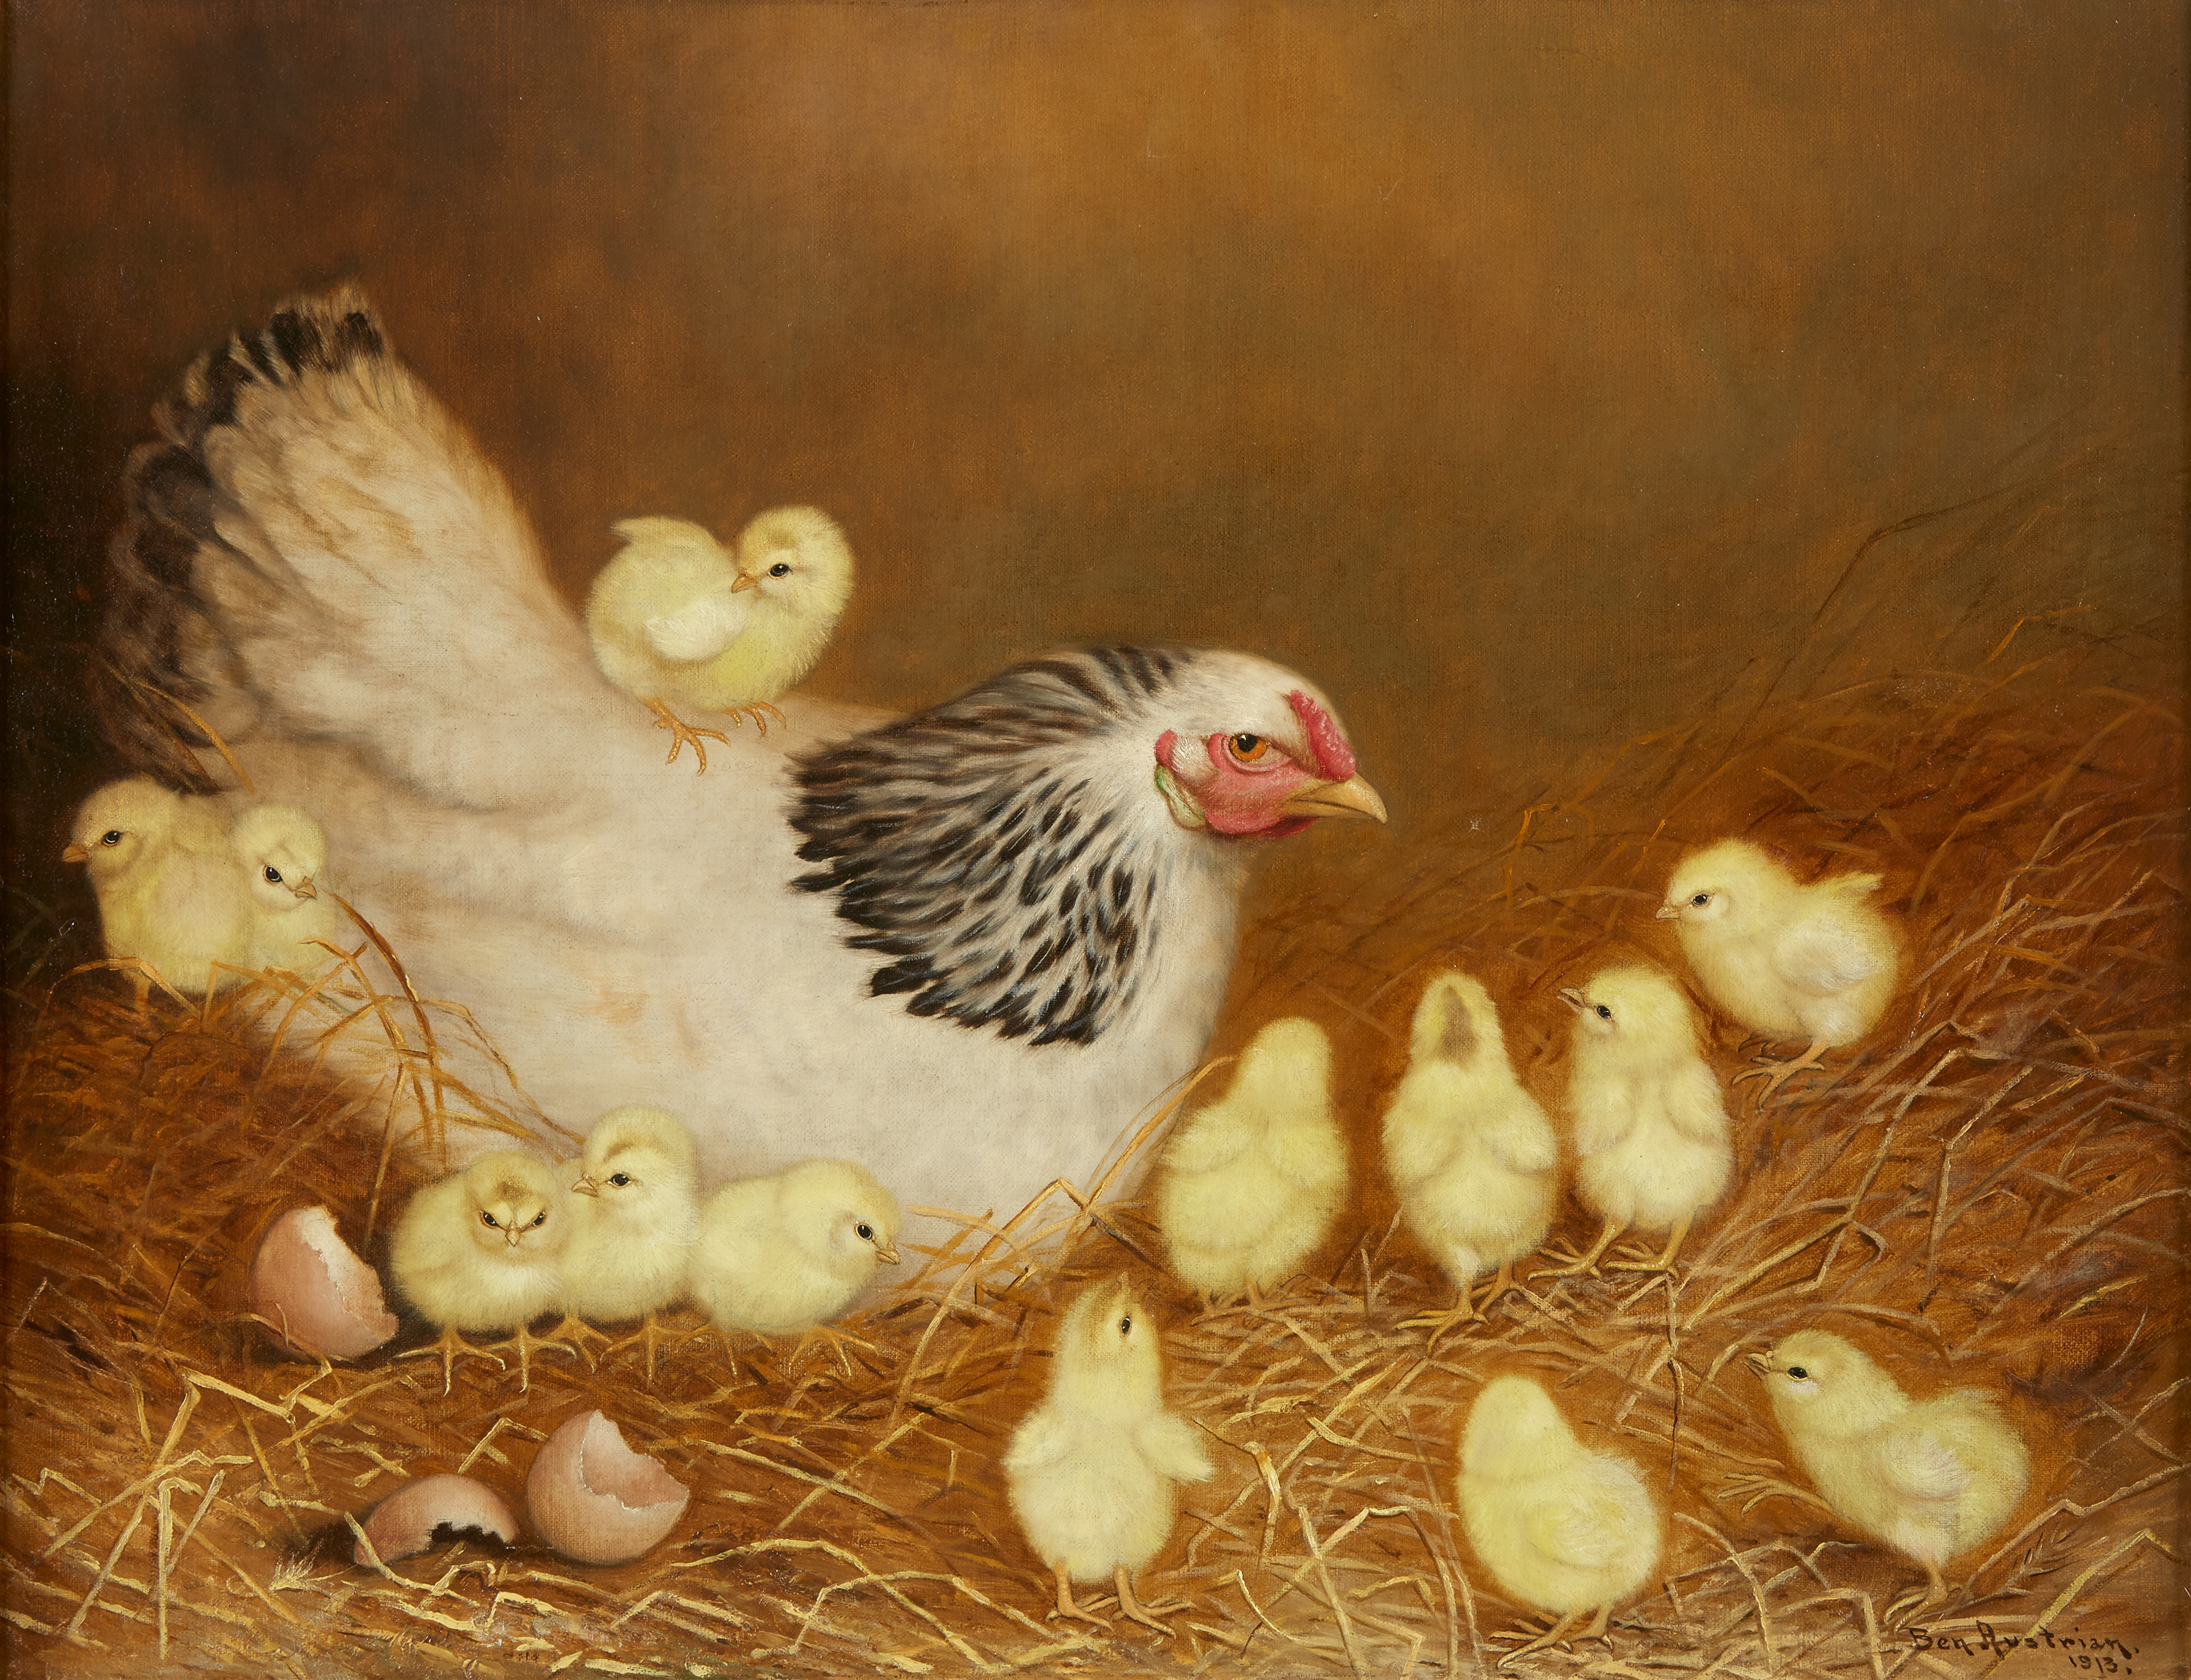 Ben Austrian's "White Hen with Chickens" shows a mother hen at left, with 13 yellow chicks clustering near her on a bed of straw. One of the chicks perches on her back.